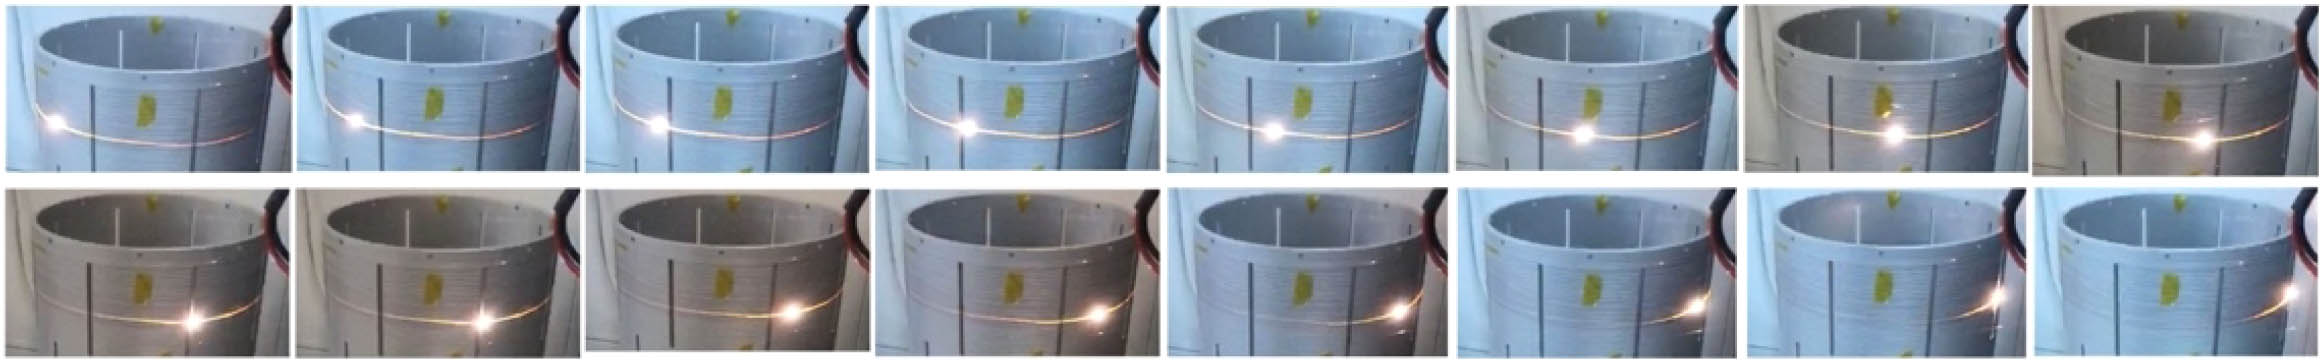 Continuous frames (30 frames per second) of a camera video of the PFF. The cylinder on which the fiber is coiled has a diameter of ∼50 cm.